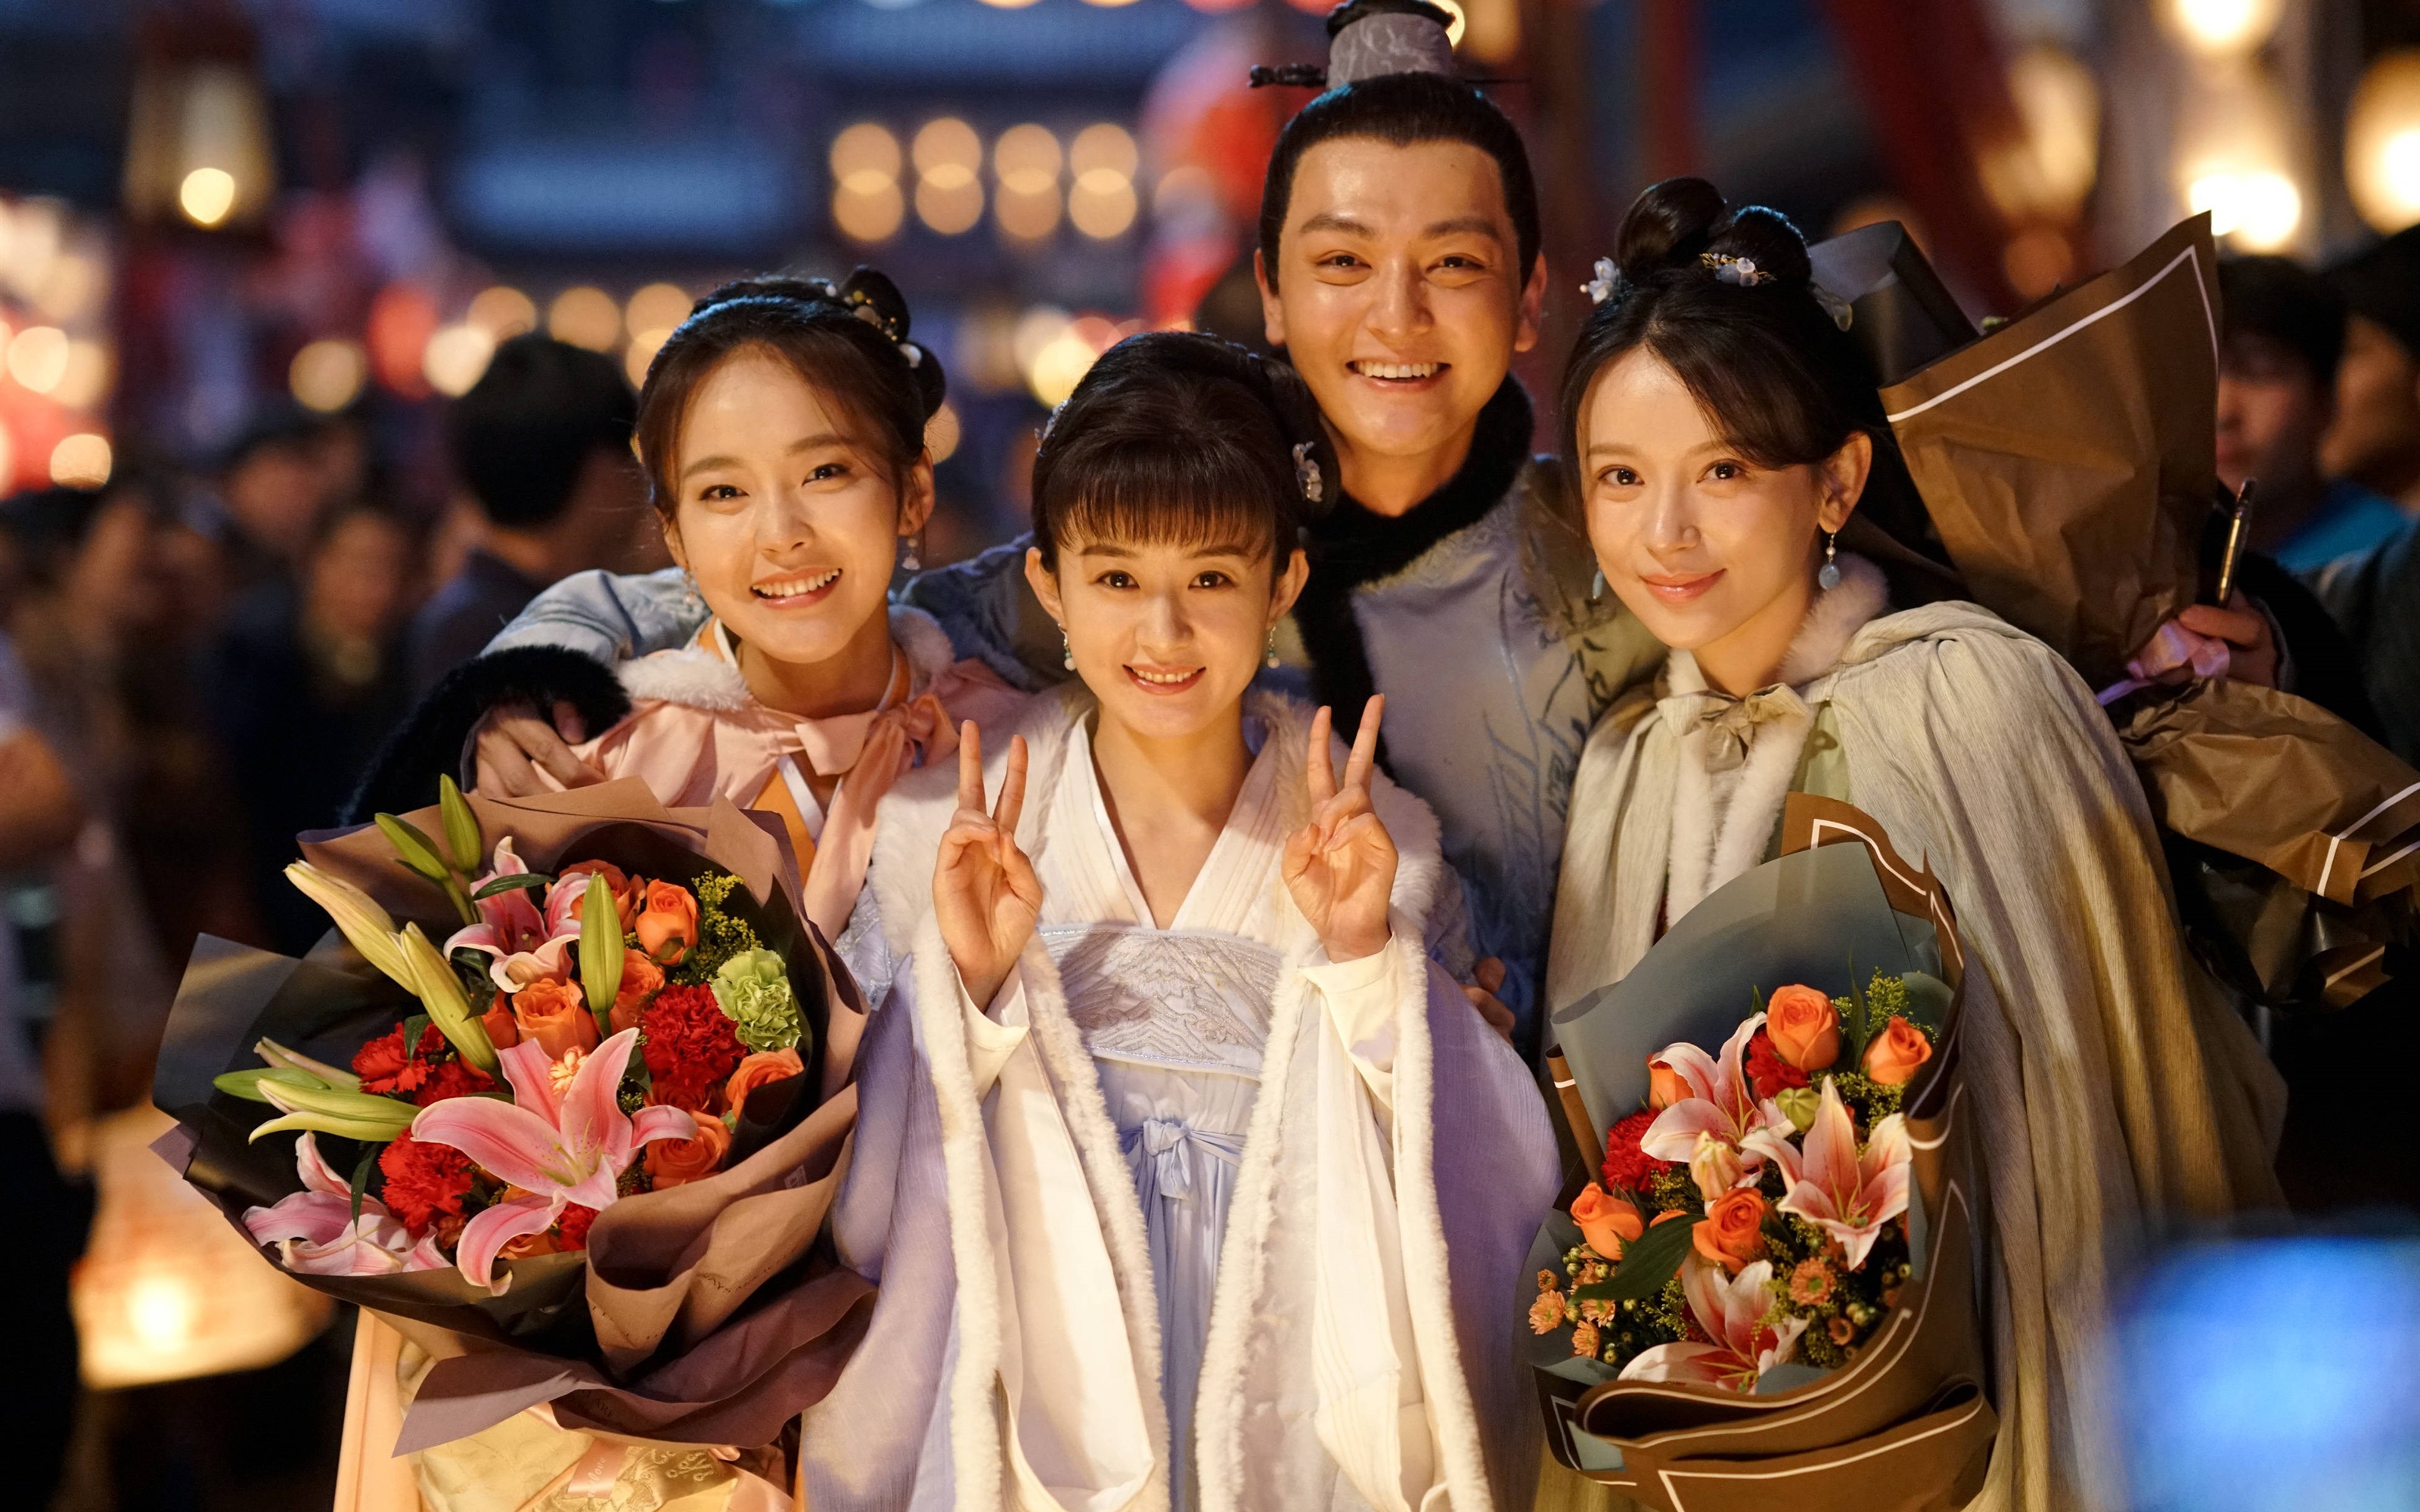 The Story Of MingLan, TV series HD wallpapers #48 - 3200x2000